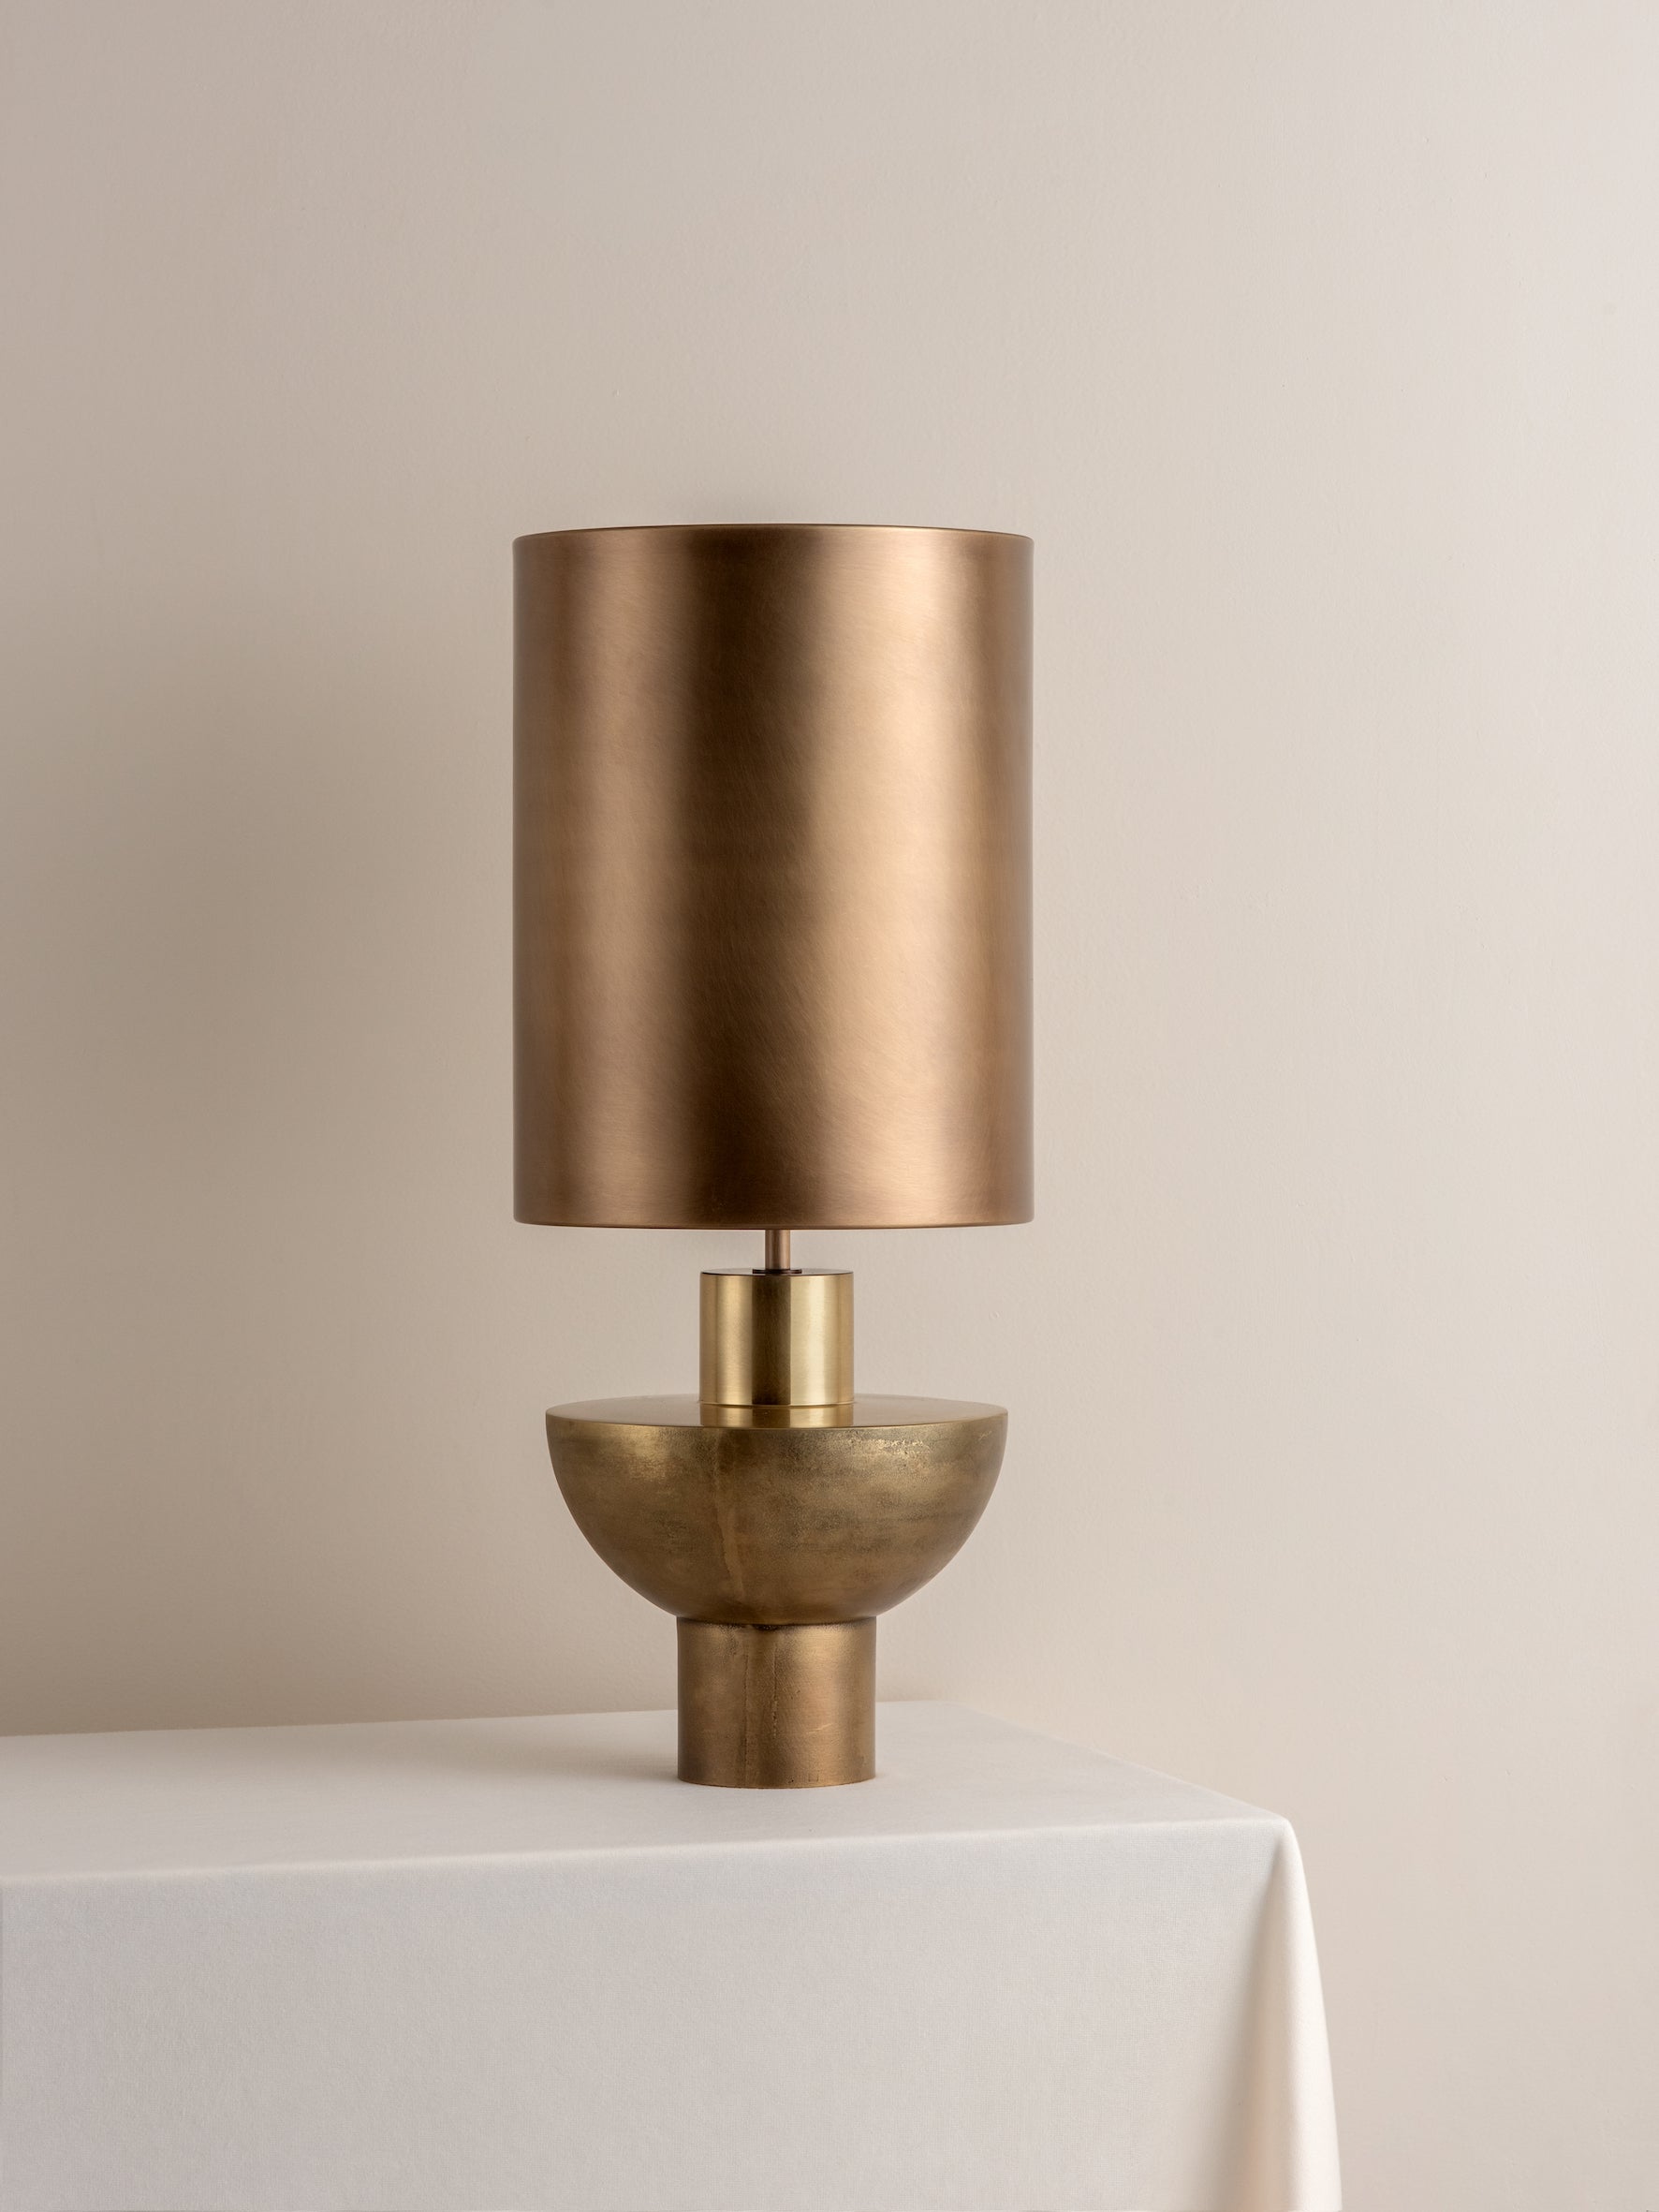 Editions brass lamp with + aged brass shade | Table Lamp | Lights & Lamps Inc | Modern Affordable Designer Lighting | USA